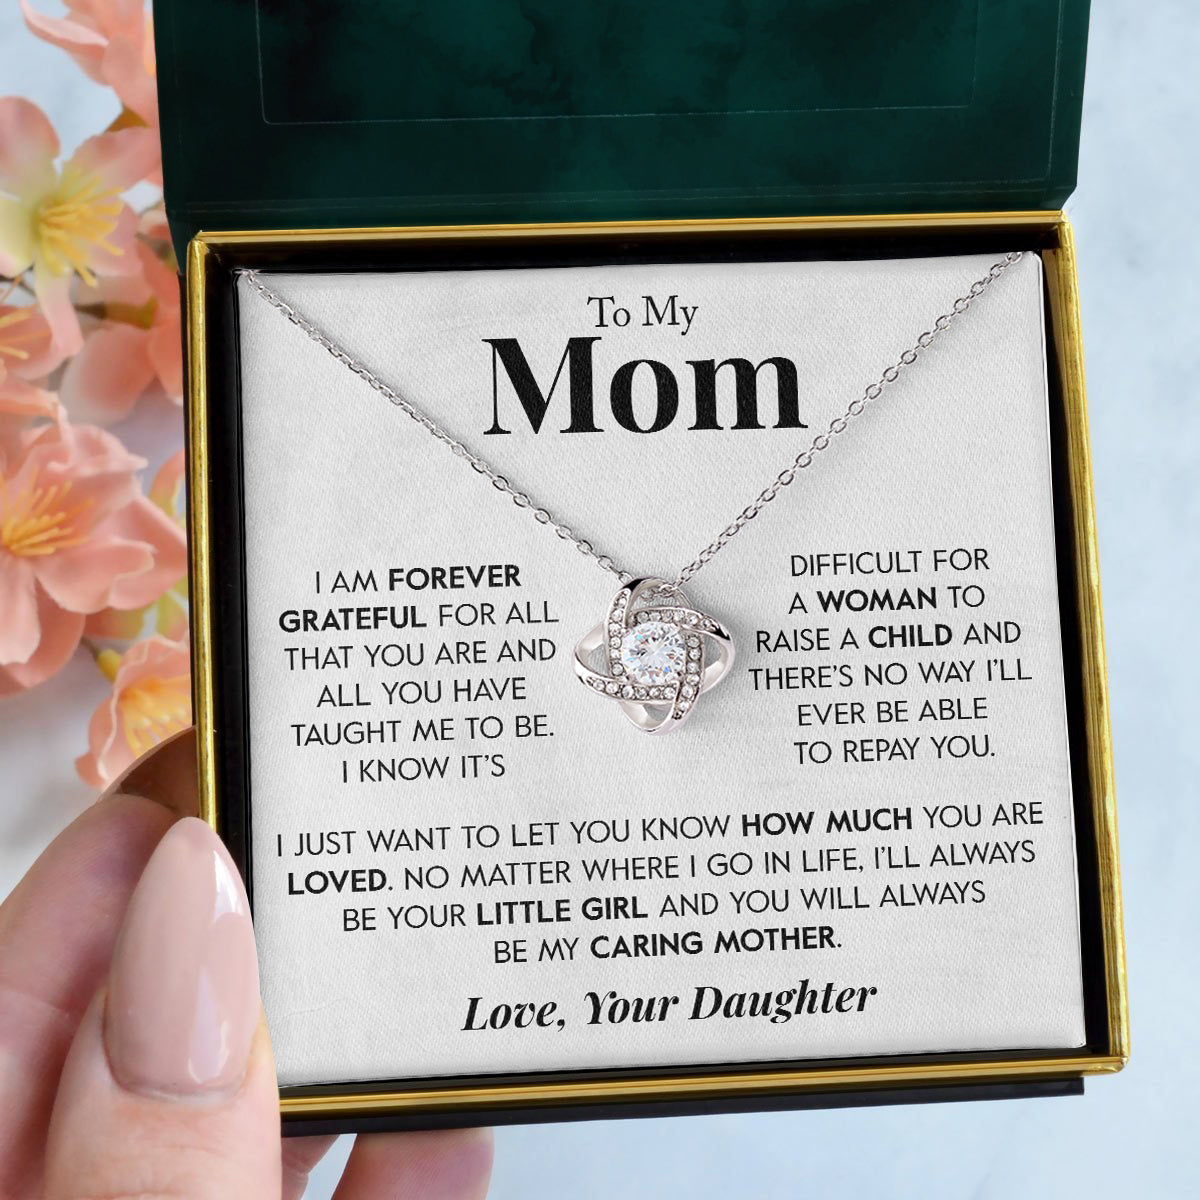 To My Mom | "Caring Mother" | Love Knot Necklace